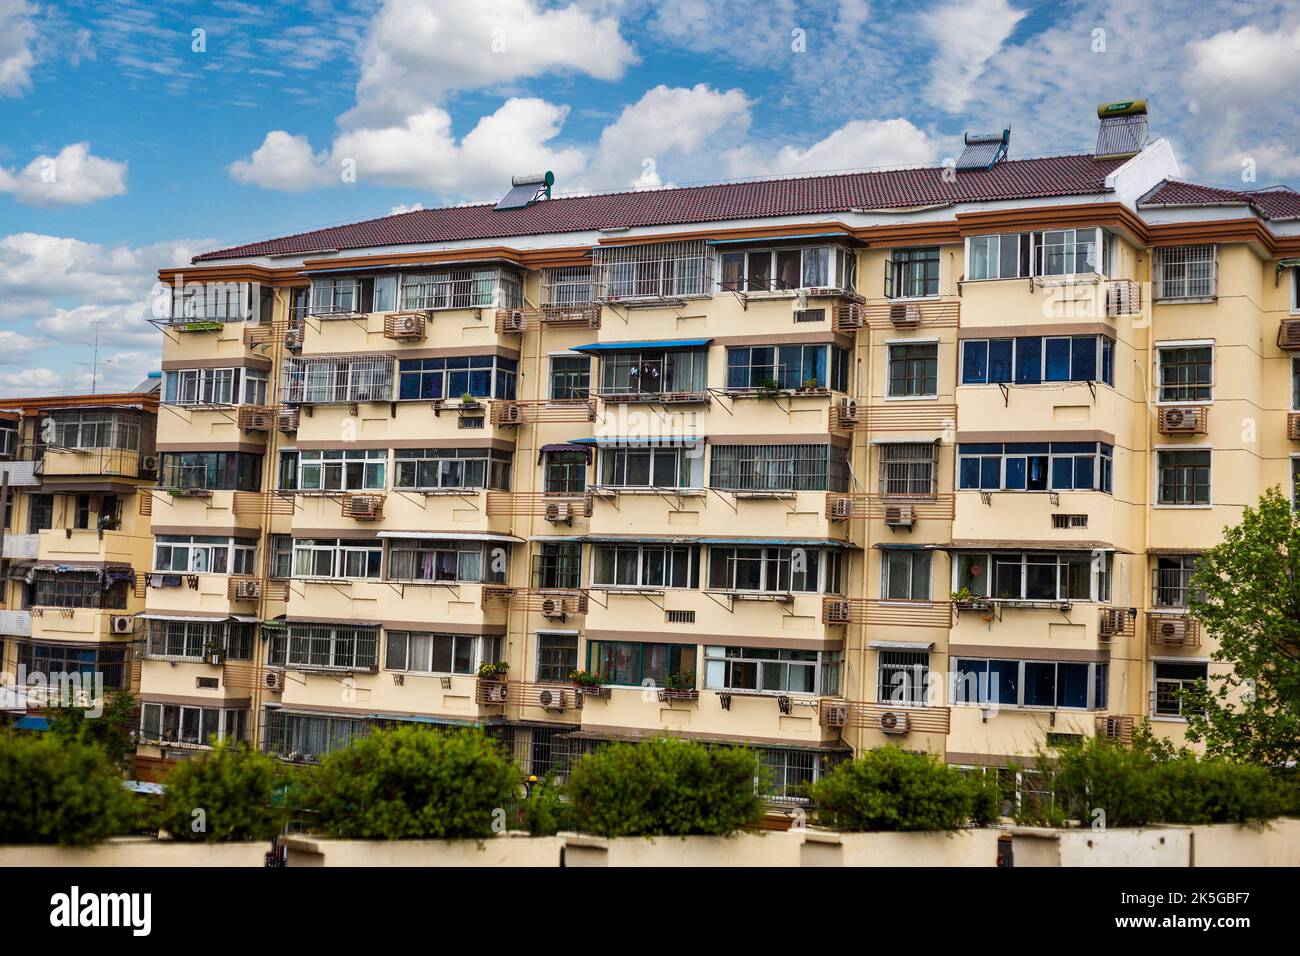 Nanjing, Jiangsu, China.  Apartment Building with Individual Air Conditioners for Each Flat.  Note Solar Water Heaters on Roof. Stock Photo